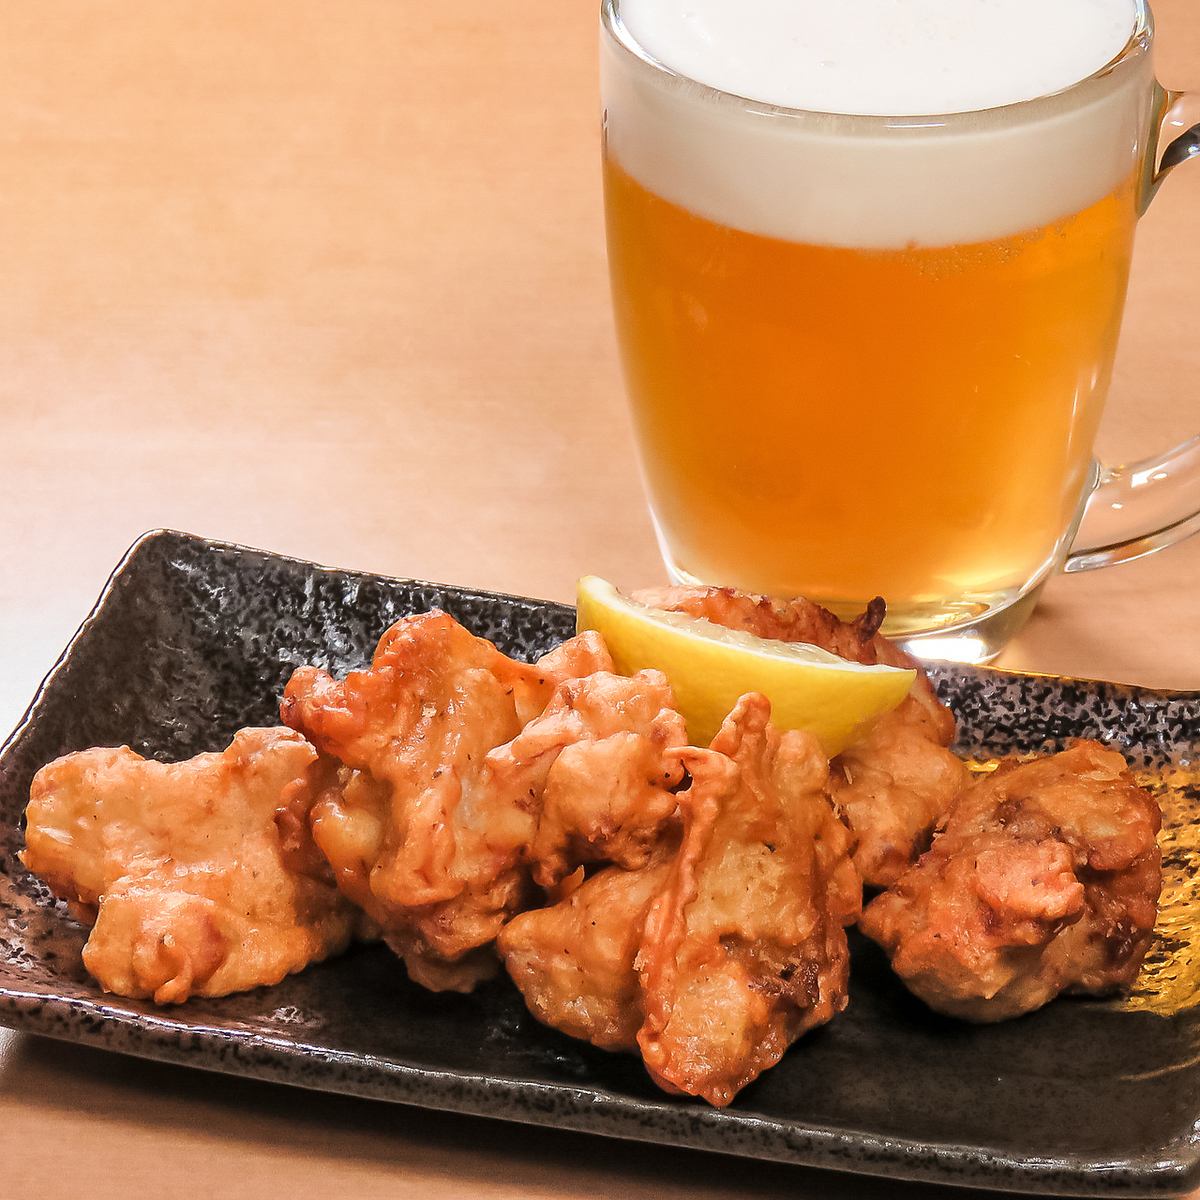 In addition to pork cutlet, we also have beer such as fried chicken and highball.